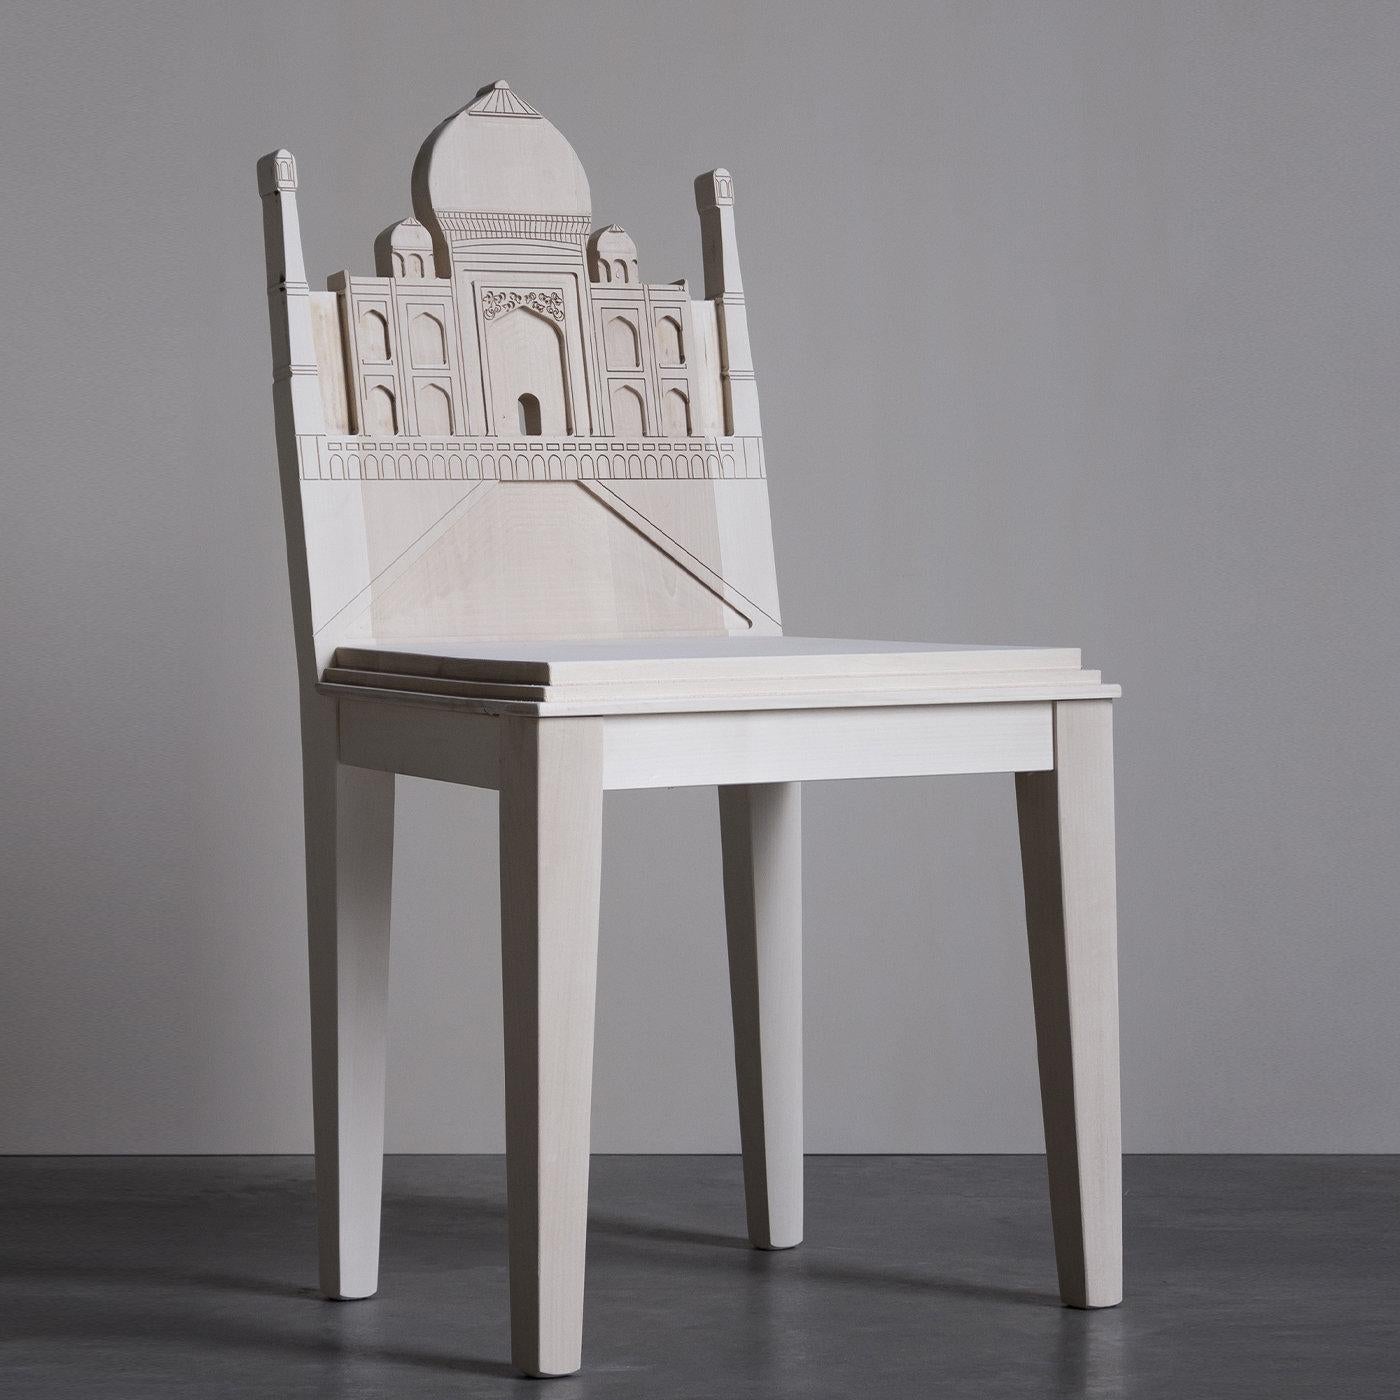 A clean and essential design that will infuse unparalleled sophistication in a contemporary decor, this chair features a singular backrest reproducing the architectural grandeur of the Taj Mahal, a marble mausoleum built in the city of Agra, India.